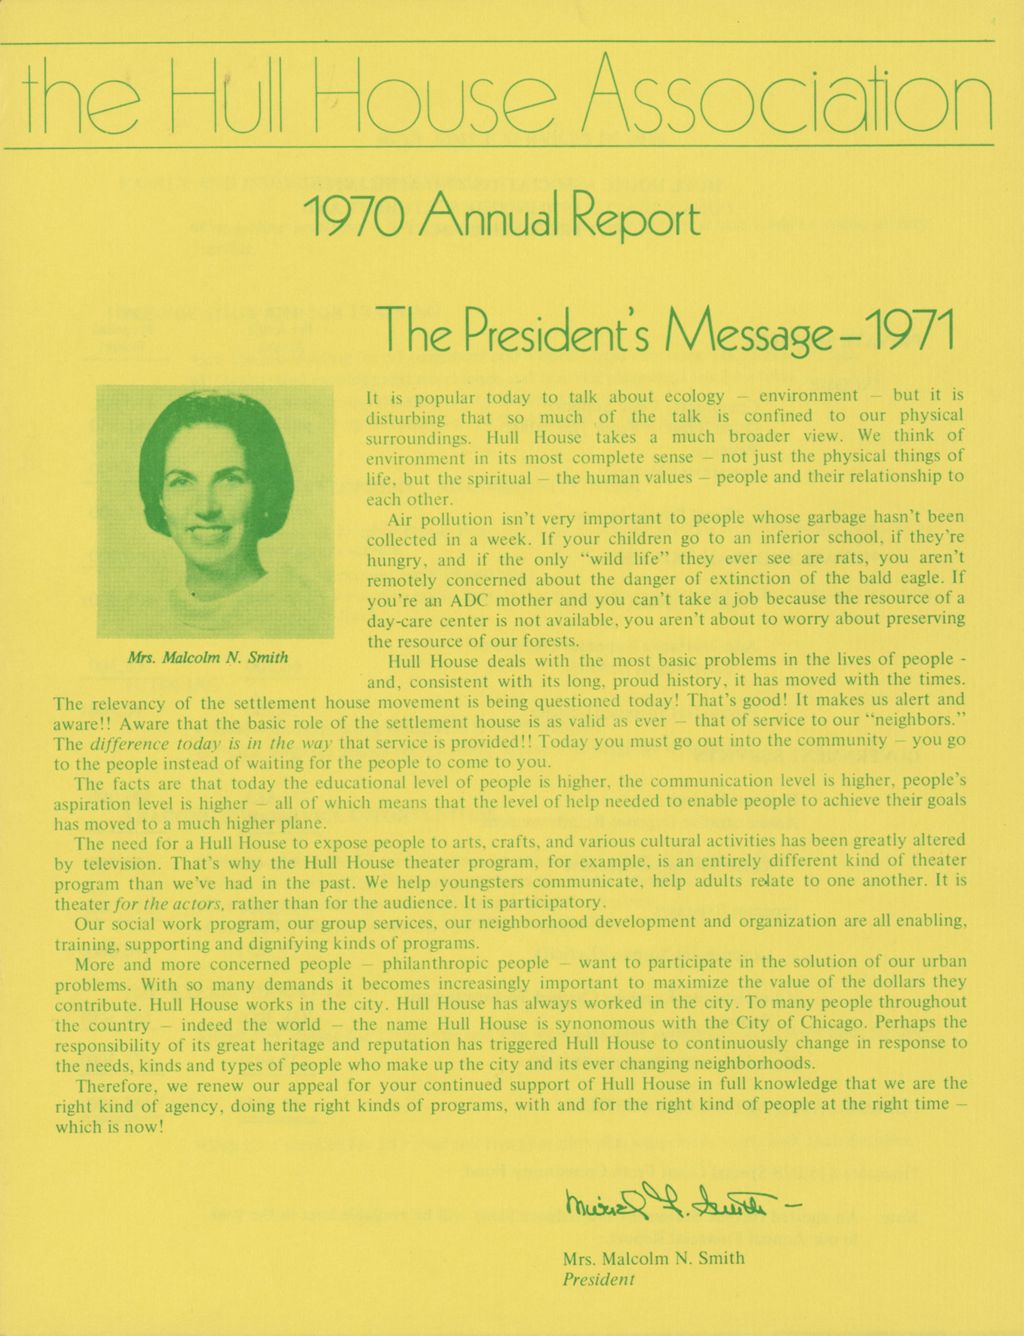 Miniature of Hull House Association, Annual Report, 1970